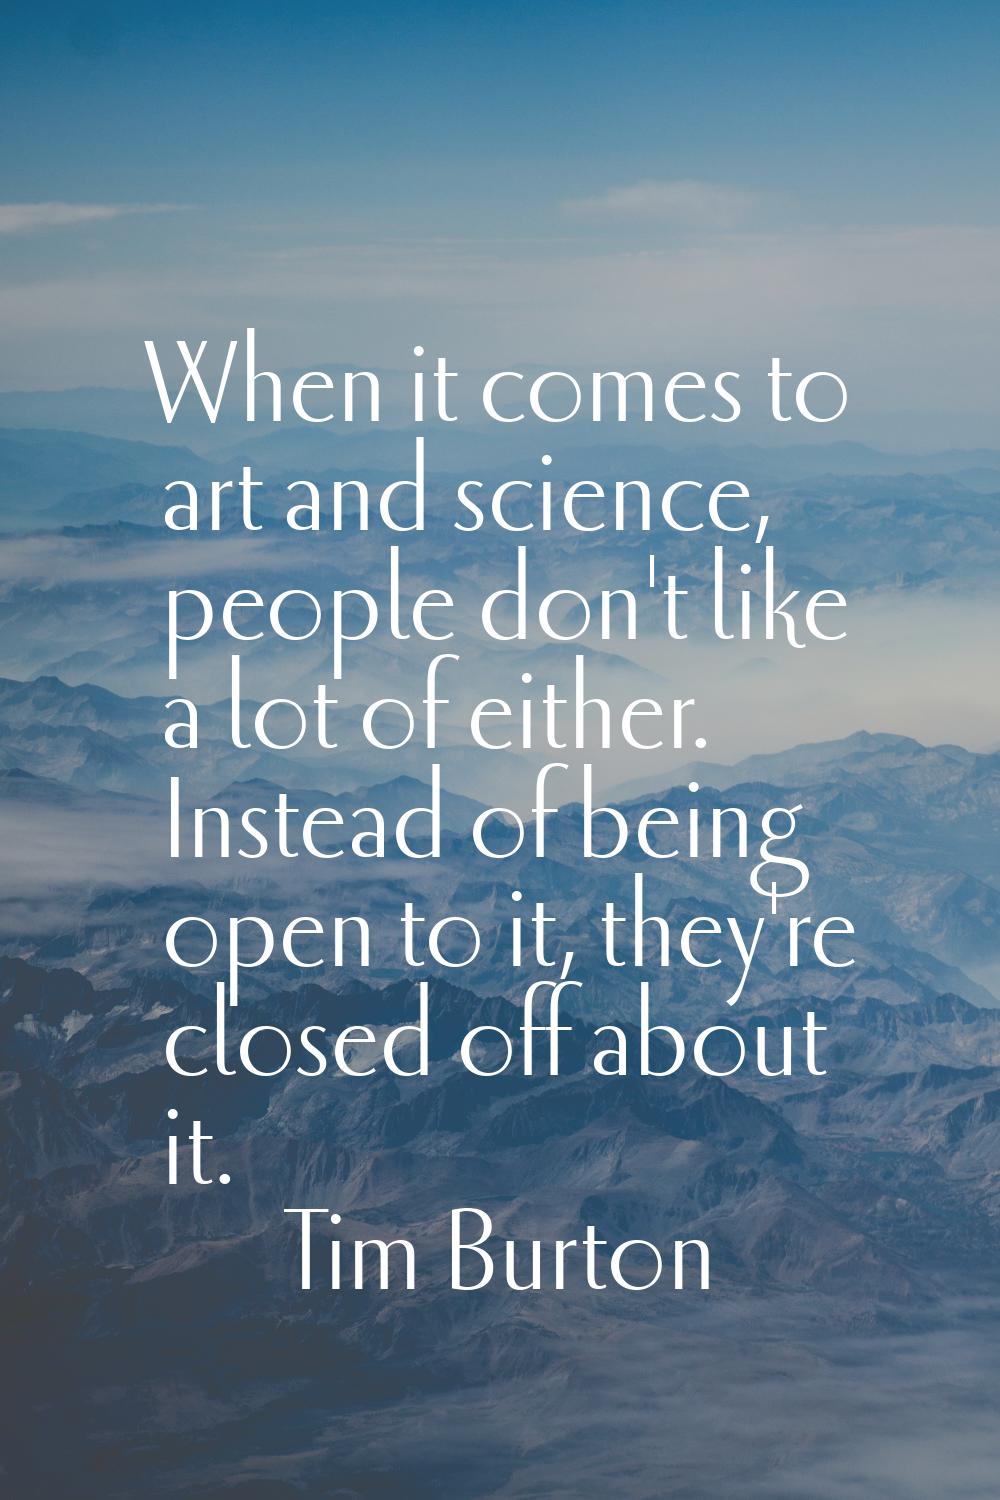 When it comes to art and science, people don't like a lot of either. Instead of being open to it, t